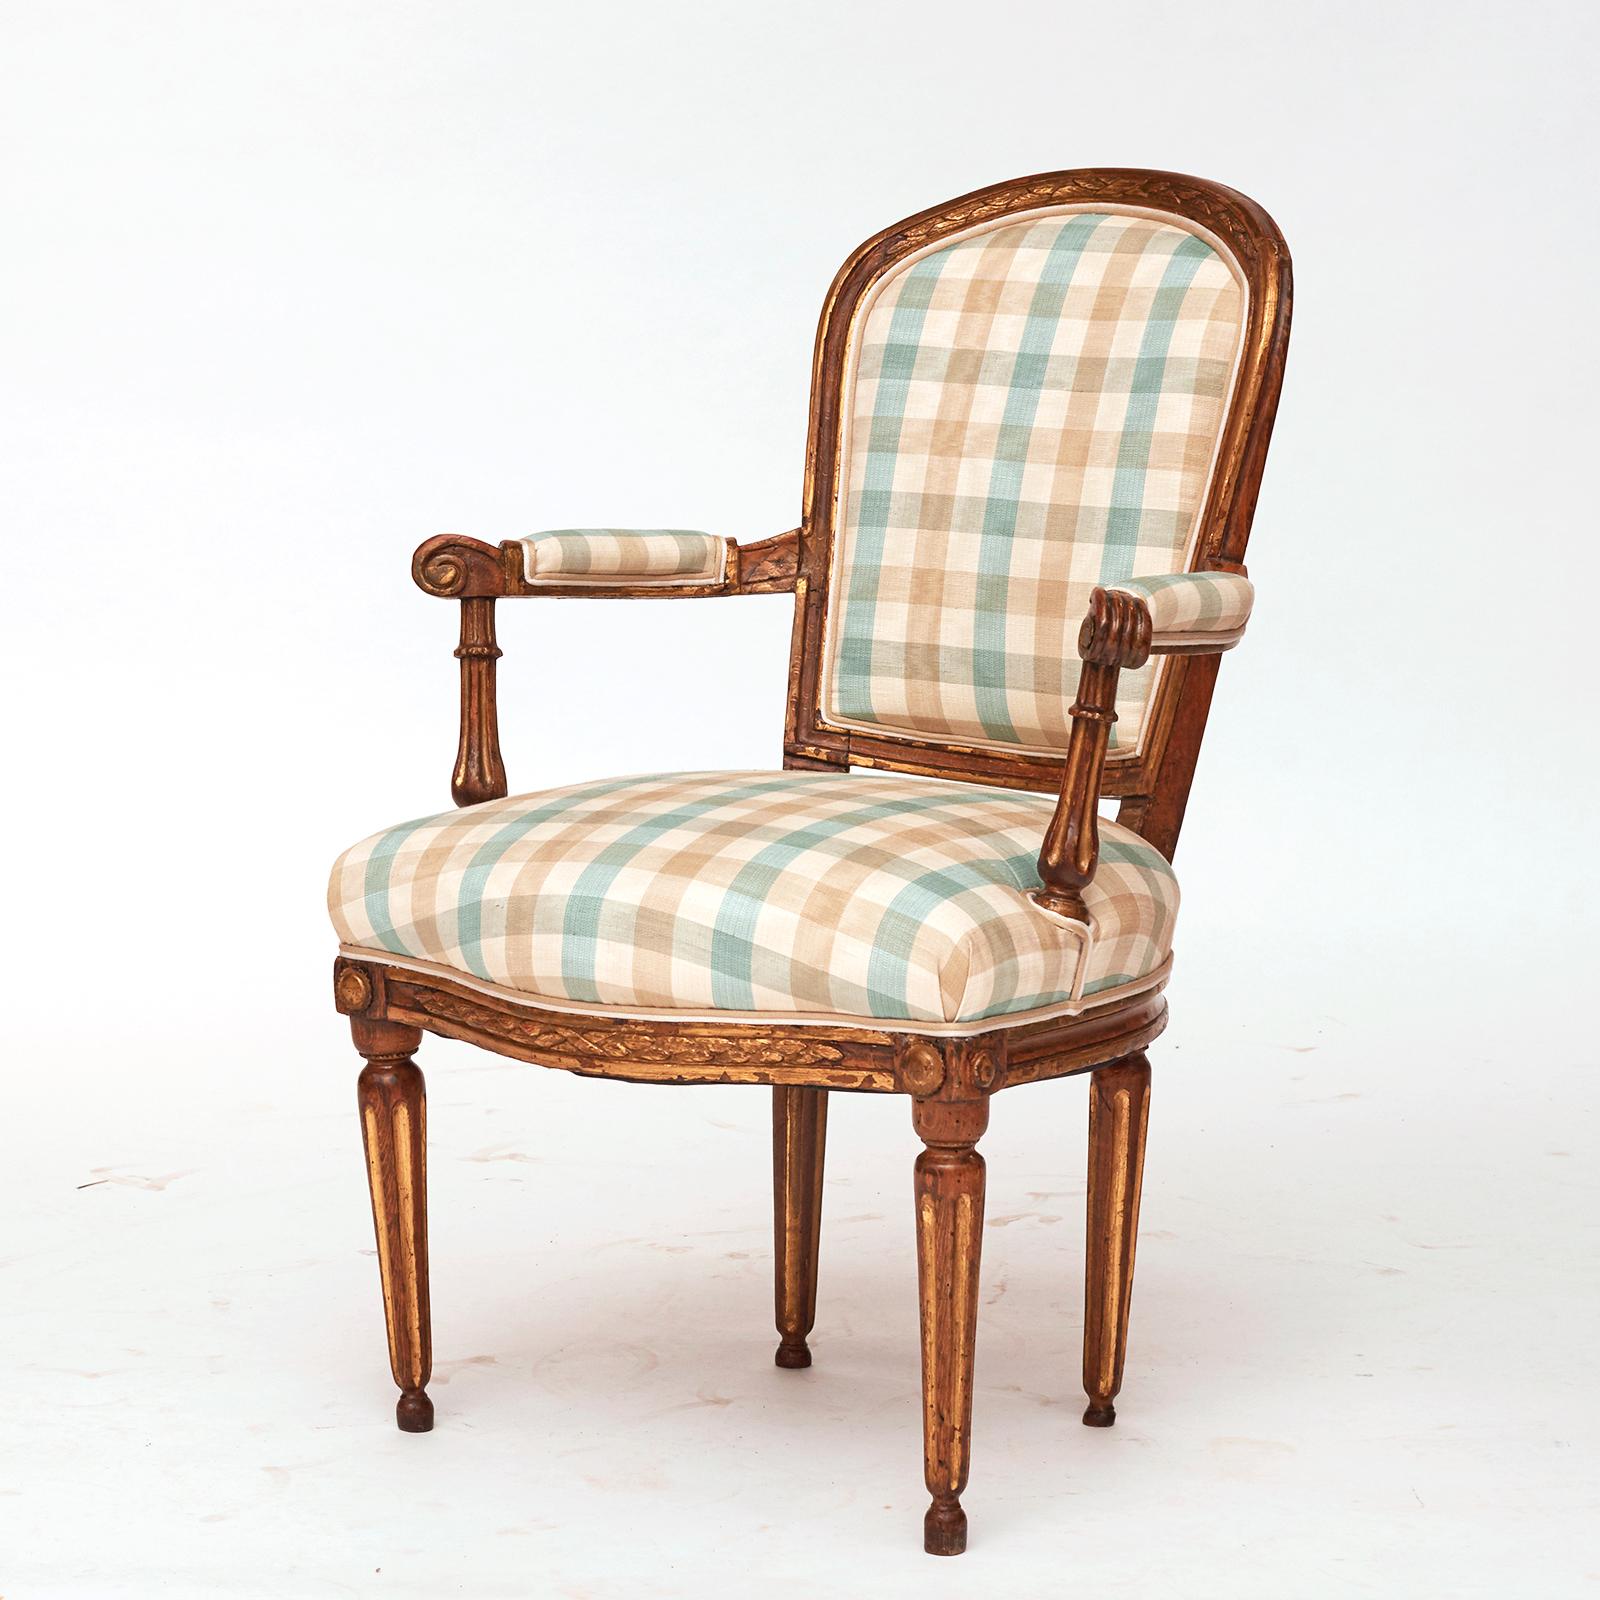 A pair of Danish Louis XVI giltwood open armchairs, Late 18th century, with a arched upholstered backrest, straight armrests, upholstered seat raised on turned fluted and tapered legs.
Wonderful giltwood patina. New upholstery.